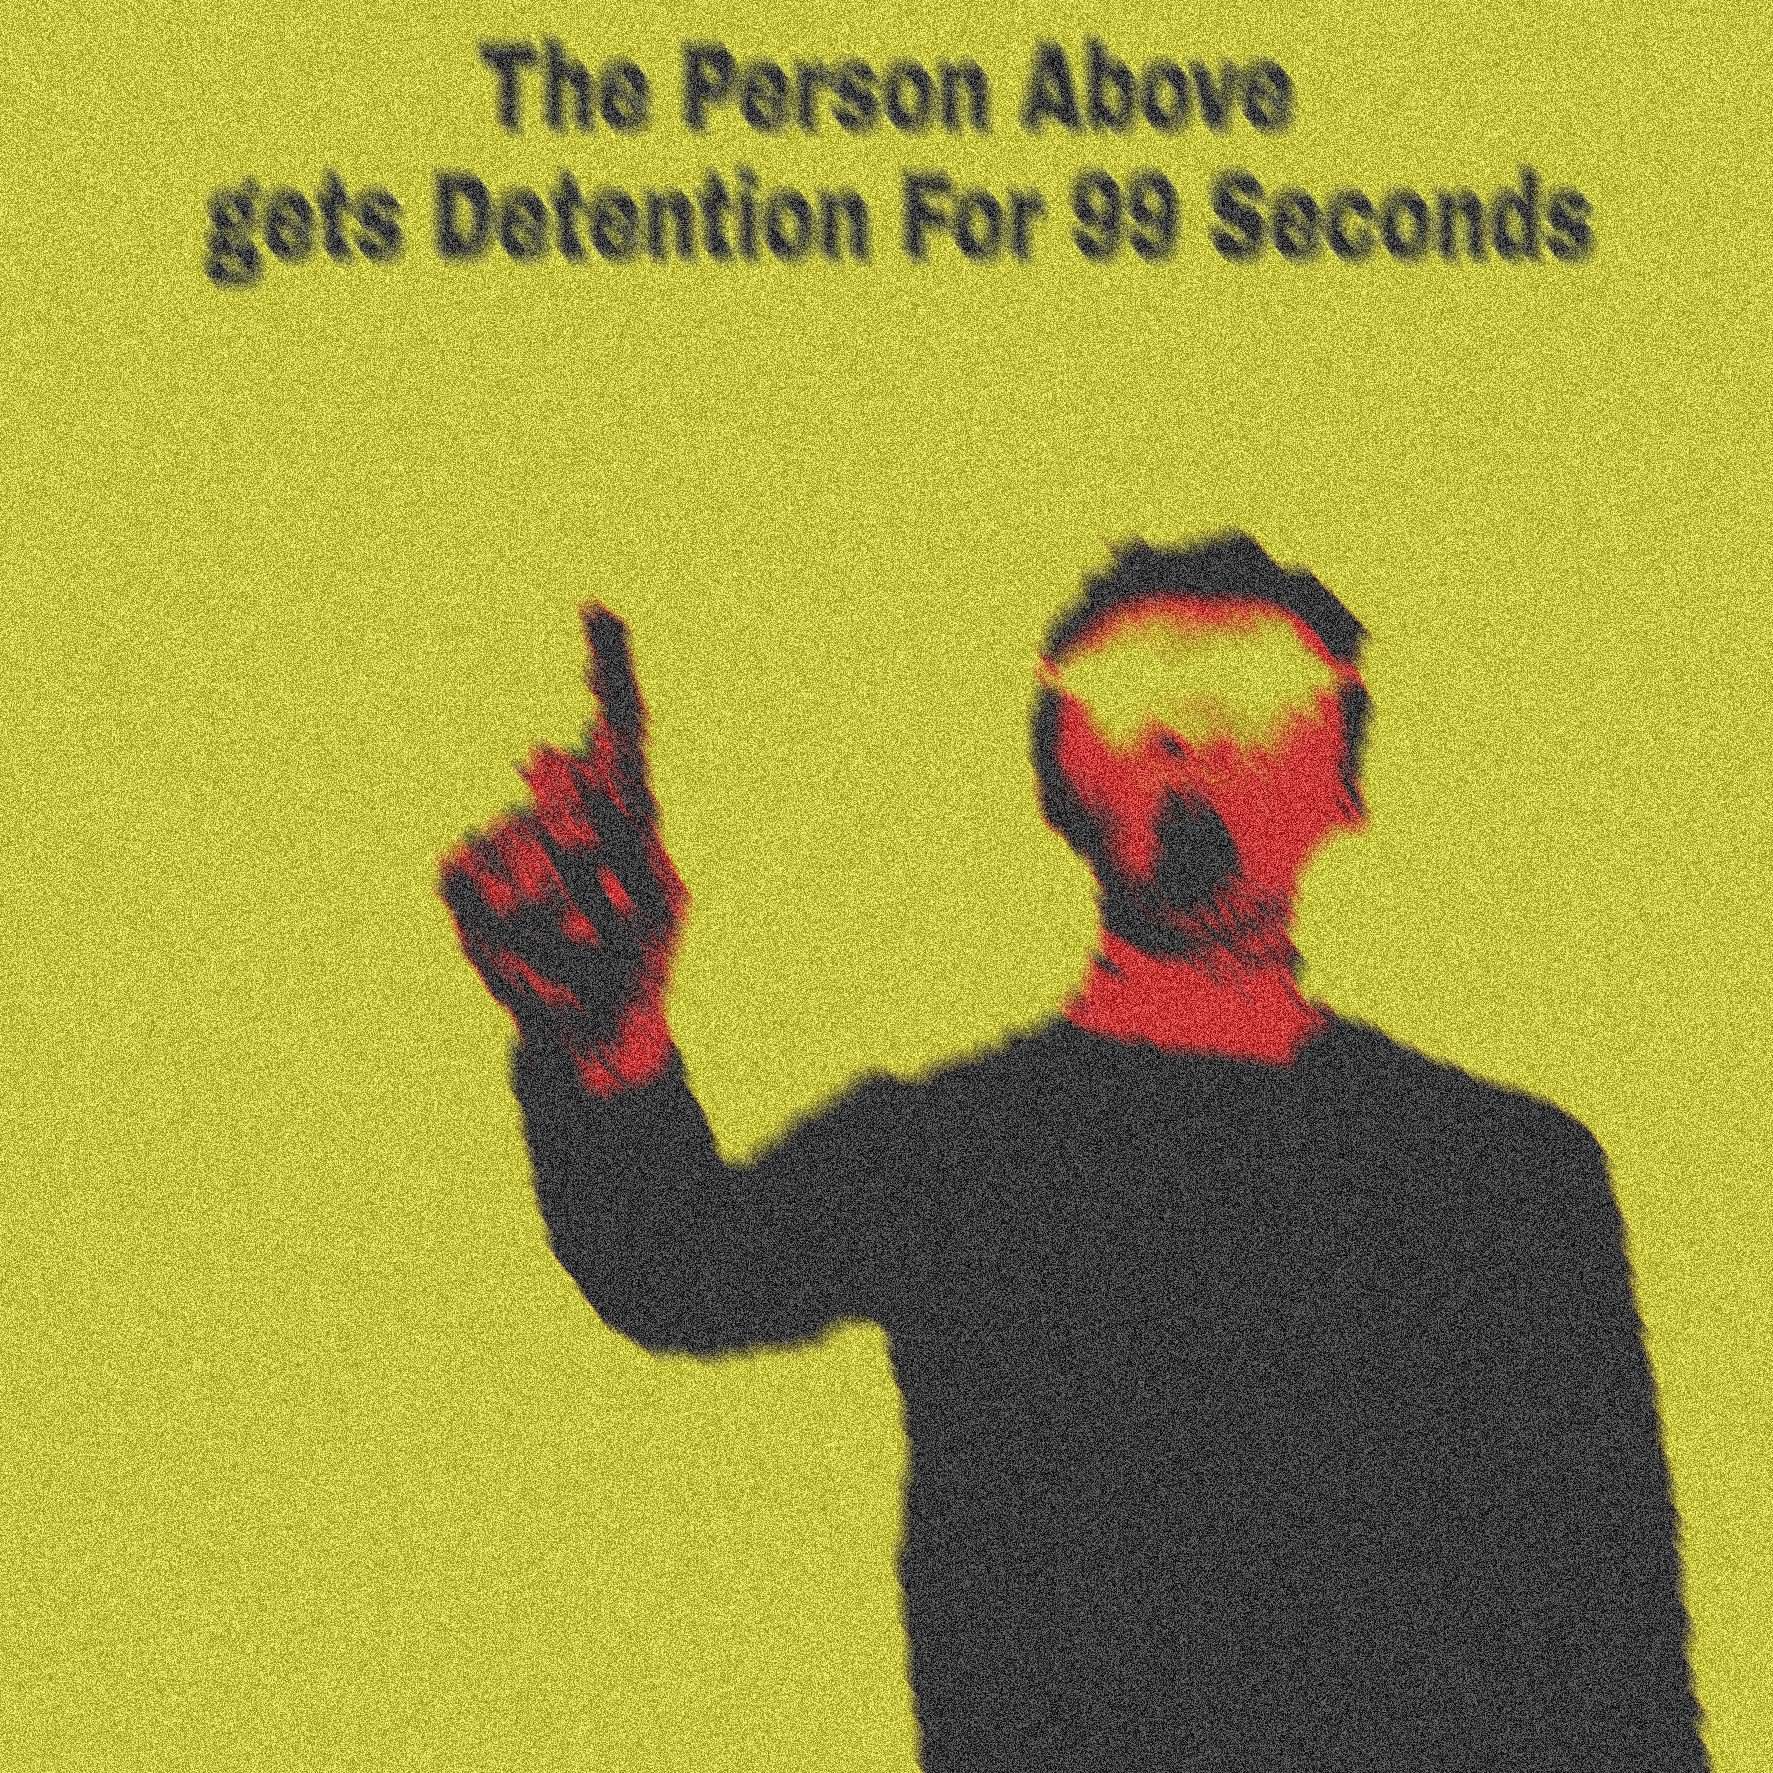 The person above gets detention for 99 seconds Blank Meme Template